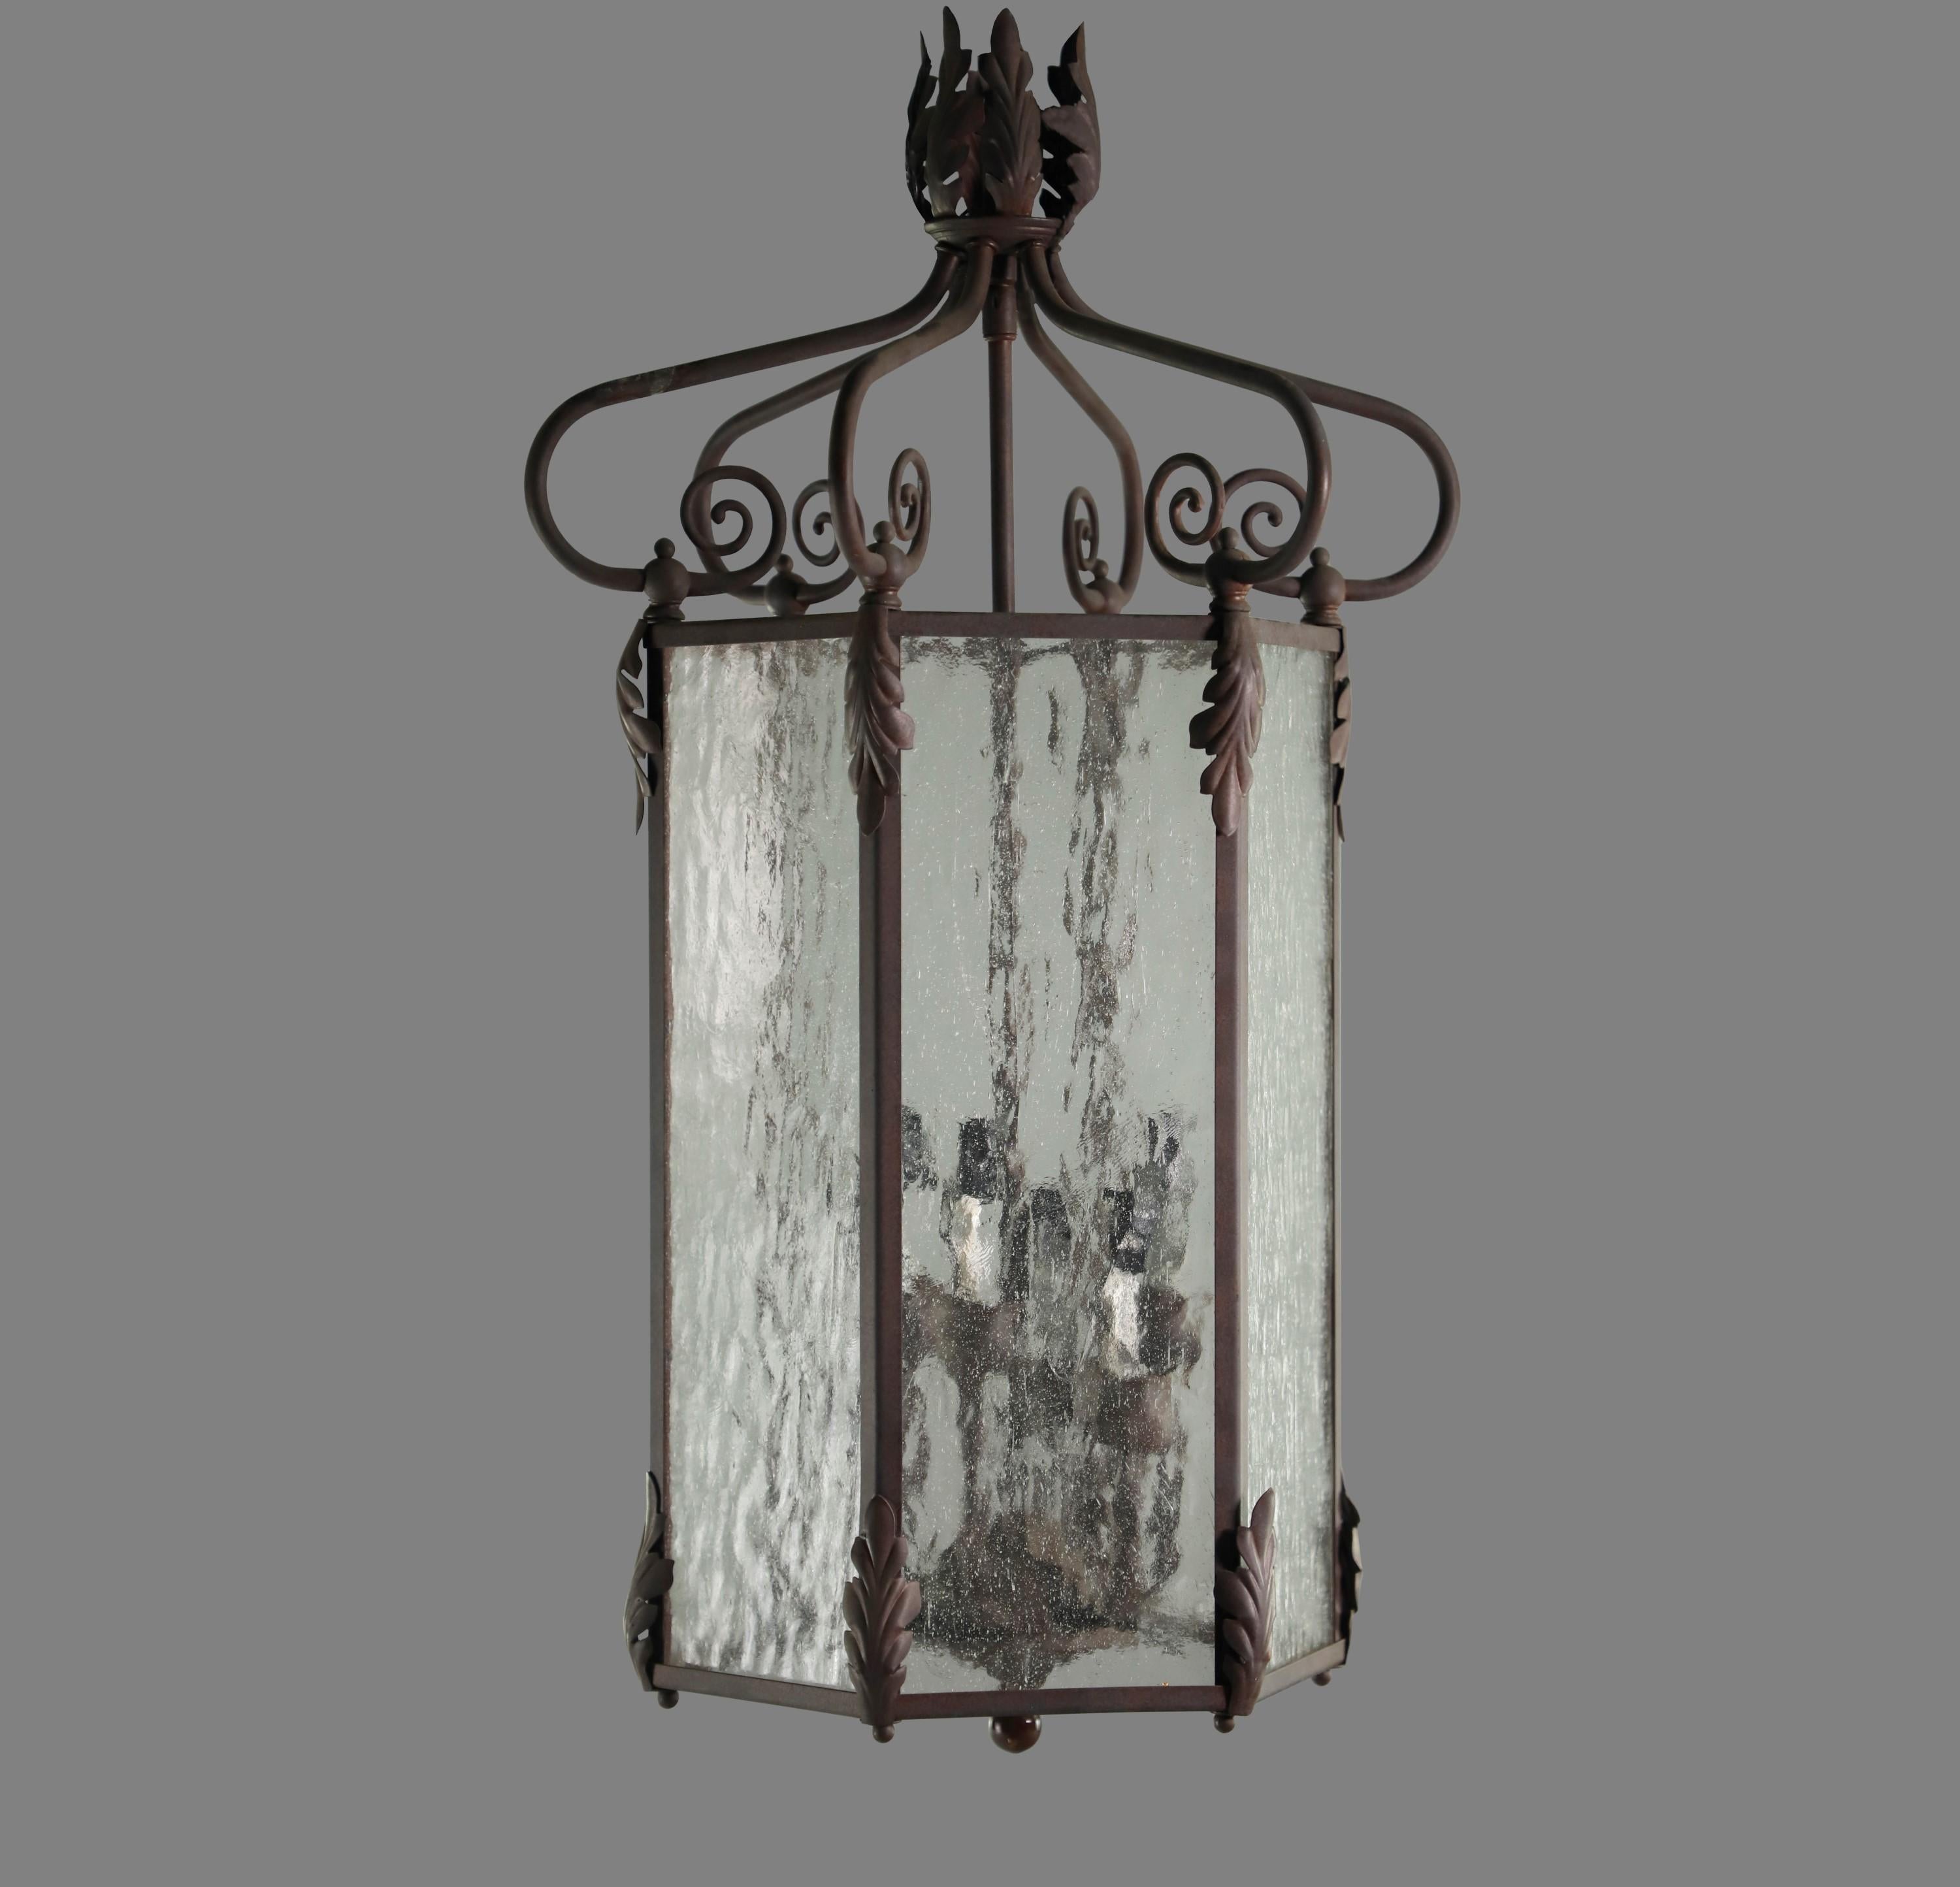 20th century pendant lantern with bronze finish with six clear textured glass side panels. Cleaned and restored including chain and canopy. Takes 6 candelabra style light bulbs. Your choice of with white or cream colored candle sleeves. Please note,